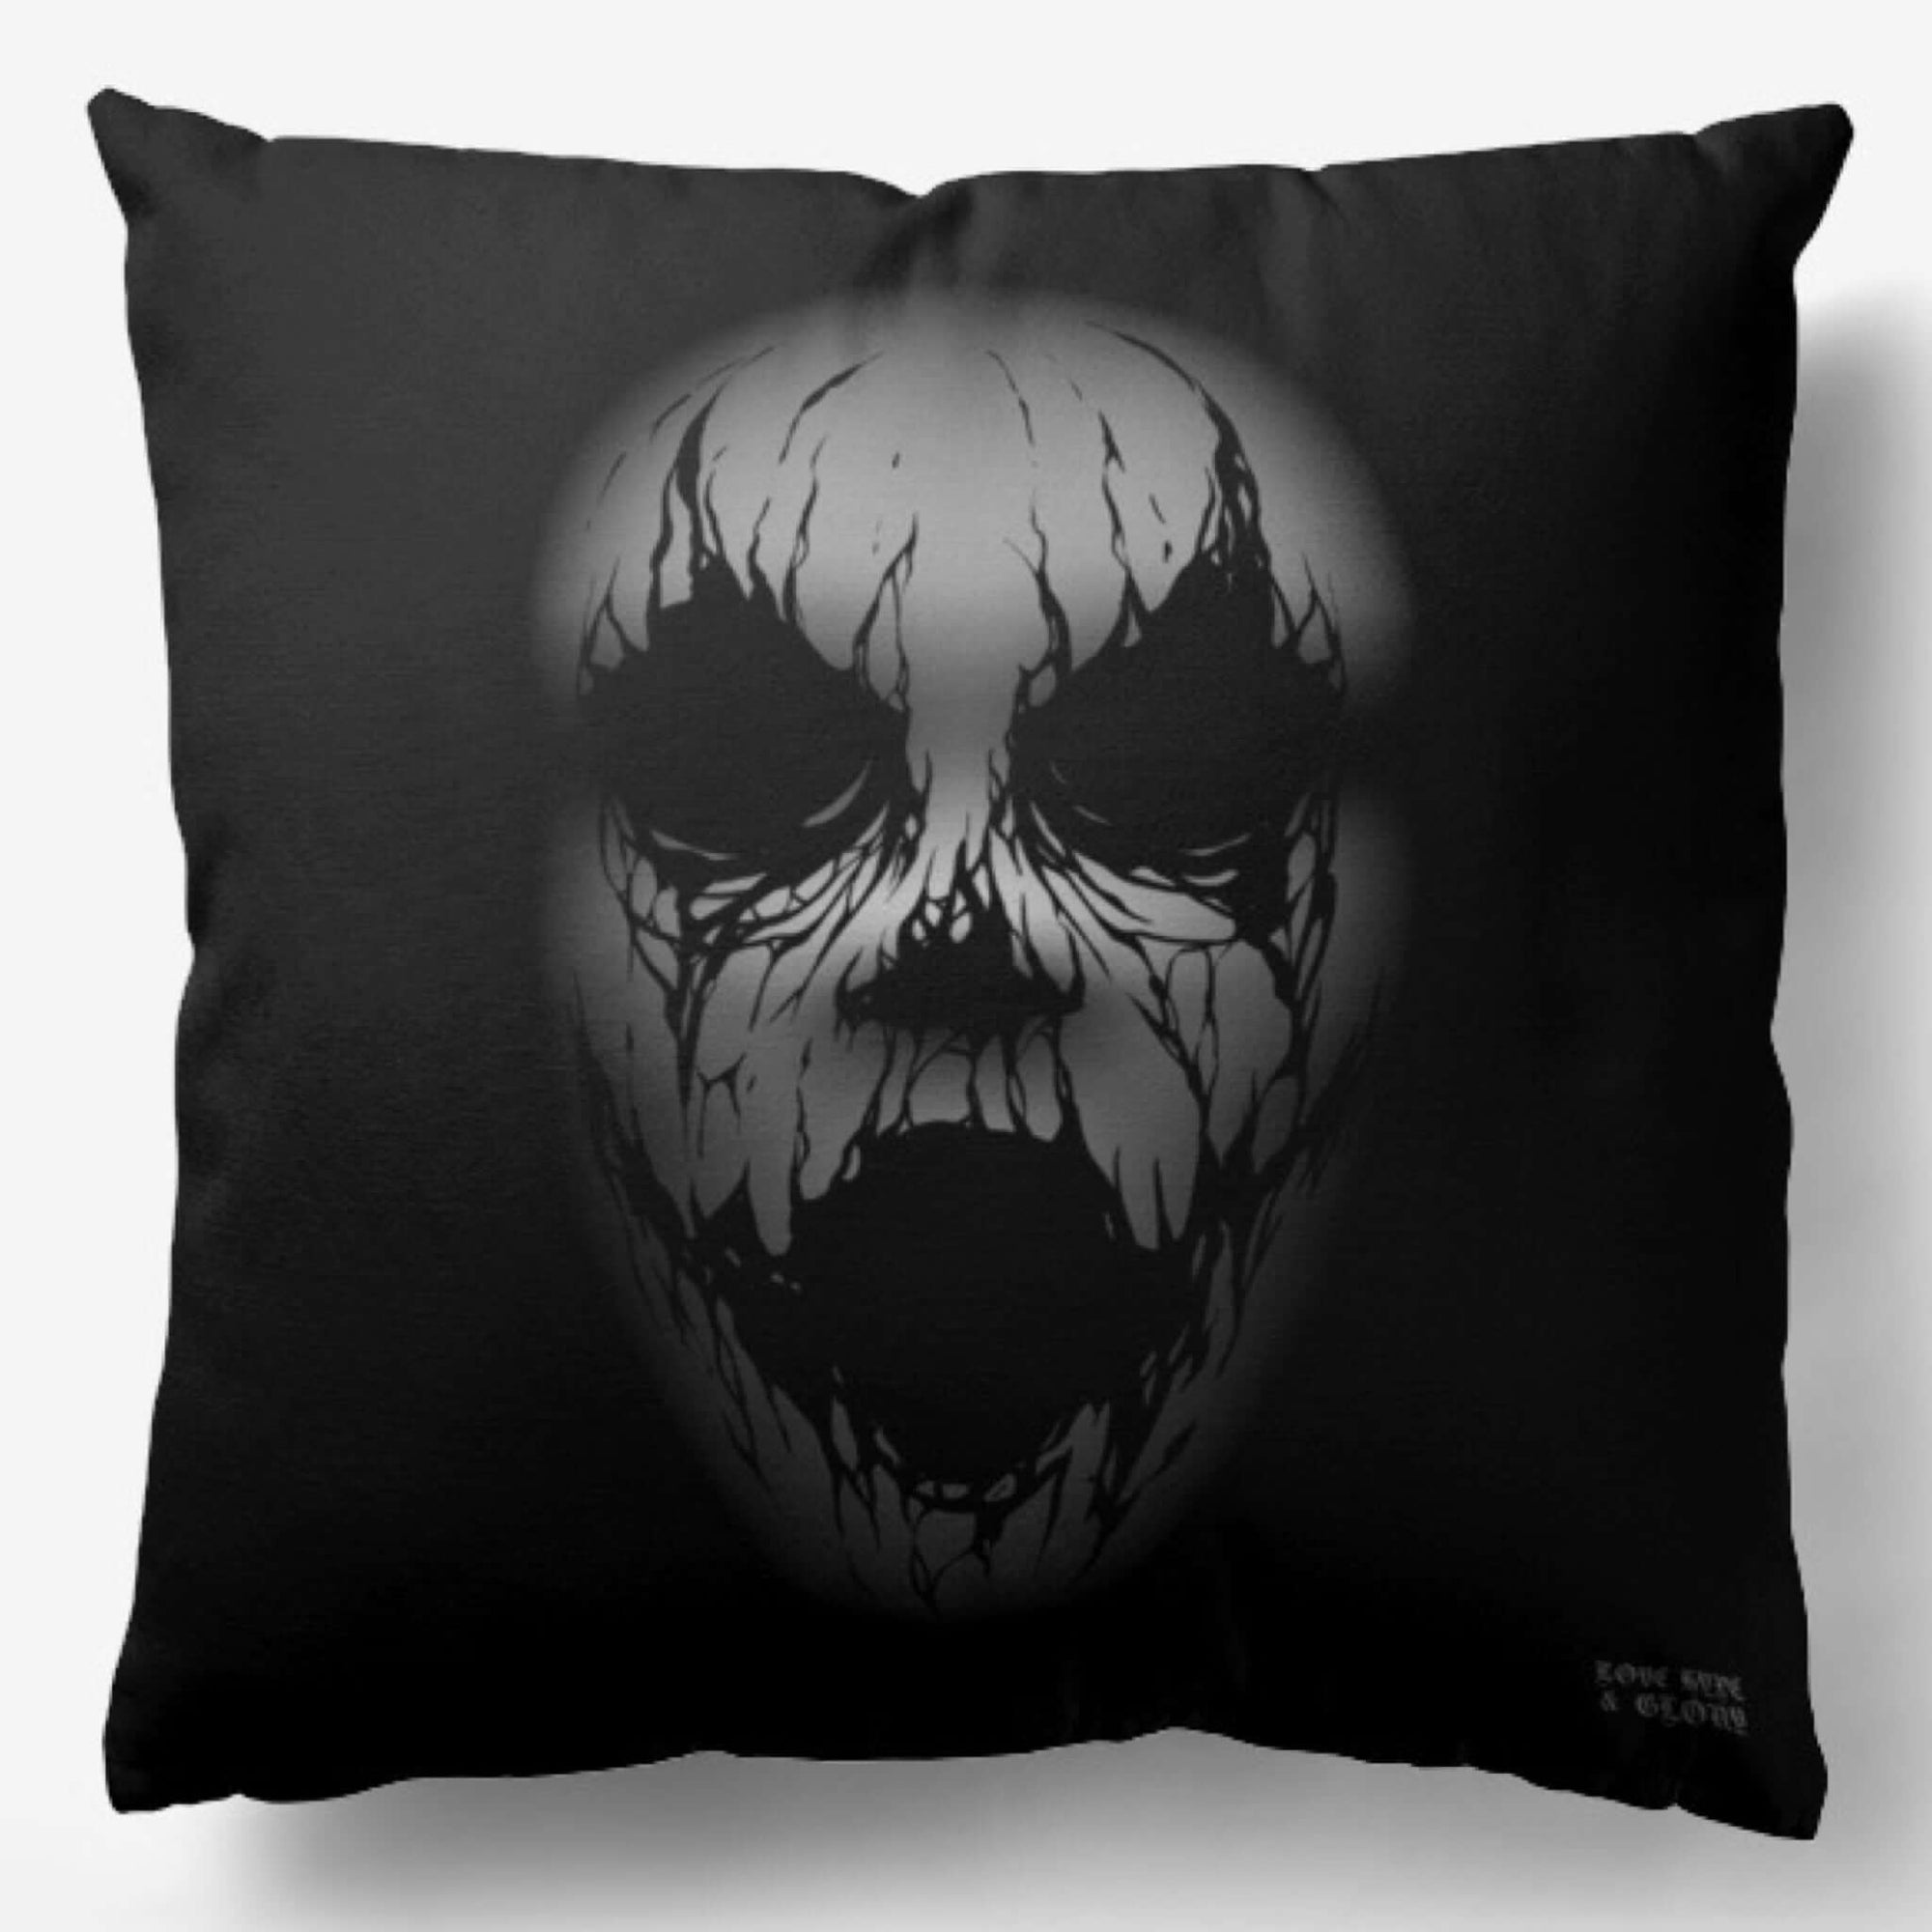 Front of Silent Scream 2-in-1 Reversible Cushion and Insert 18x18”